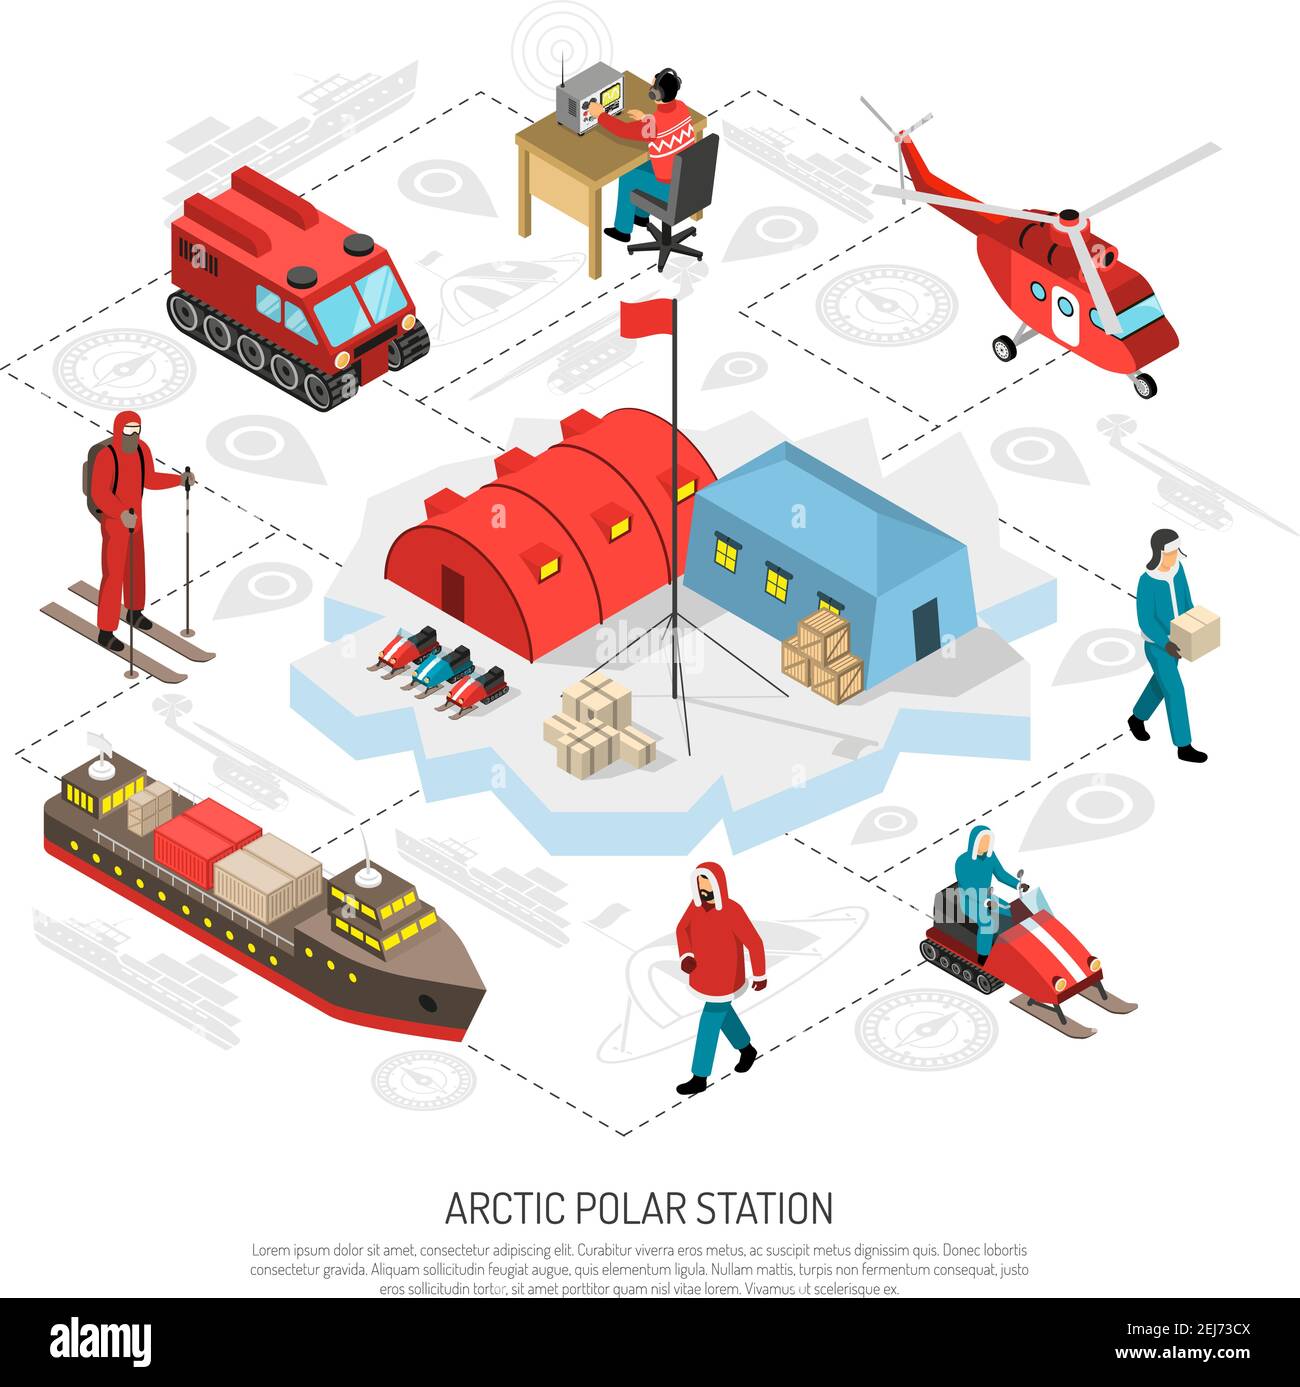 Arctic polar meteorological radio station isometric flowchart style poster with icebreaker tracked vehicles snowmobiles helicopter vector illustration Stock Vector